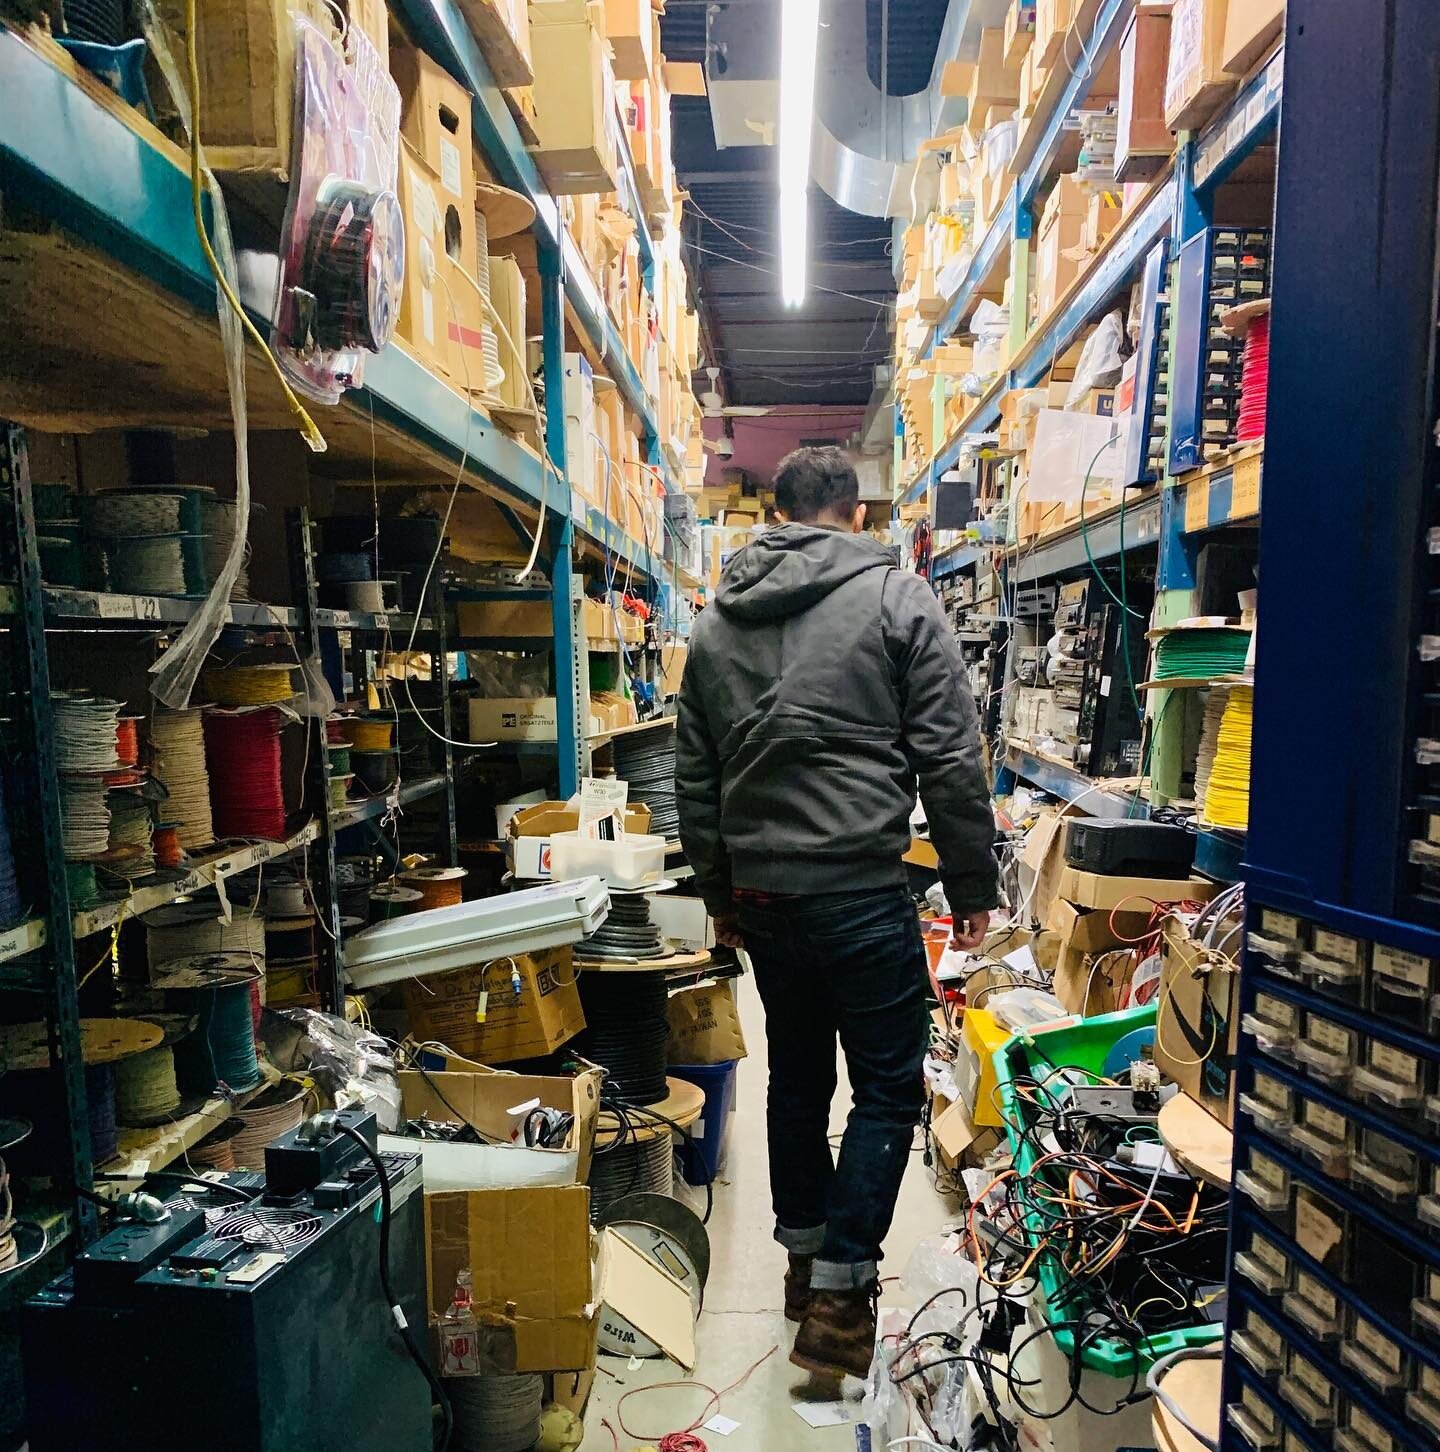 Nothing like a clean surplus electronics shop!
.
.
.
.
#cleaning #electronics #diydecor #hunting #diy